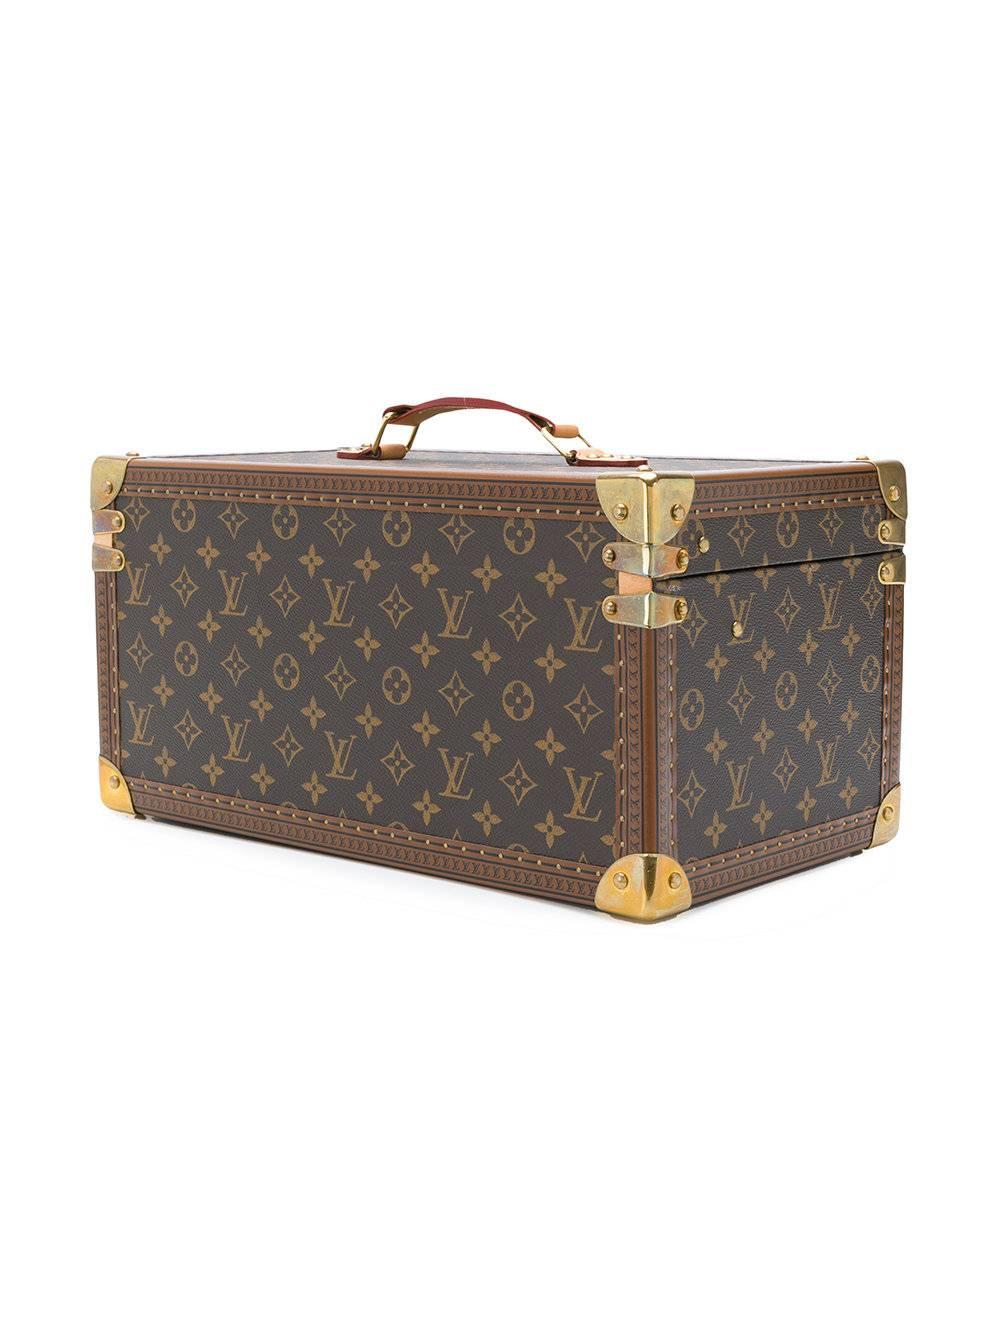 This Brown and beige leather trunk cosmetic box from Louis Vuitton Vintage featuring a flat top handle, foldover top with twist-lock closure, a clasp fastening, a main internal compartment, a monogram pattern, gold-tone hardware, a structured design